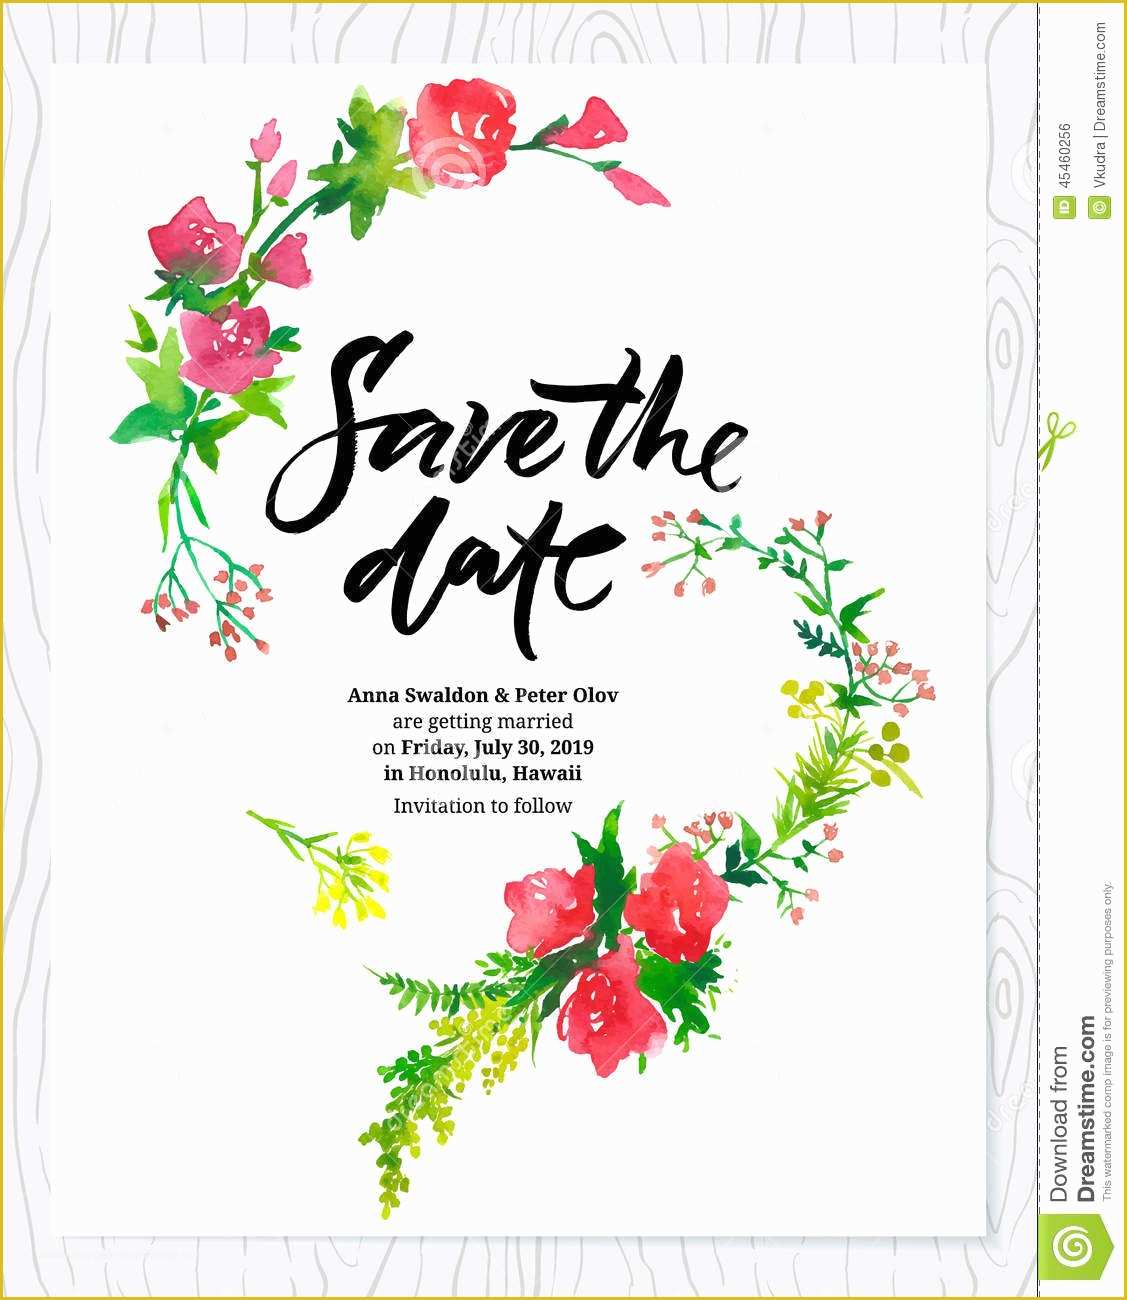 Save the Date Indian Wedding Templates Free Of Wedding Floral Watercolor Card Save the Date Stock Vector